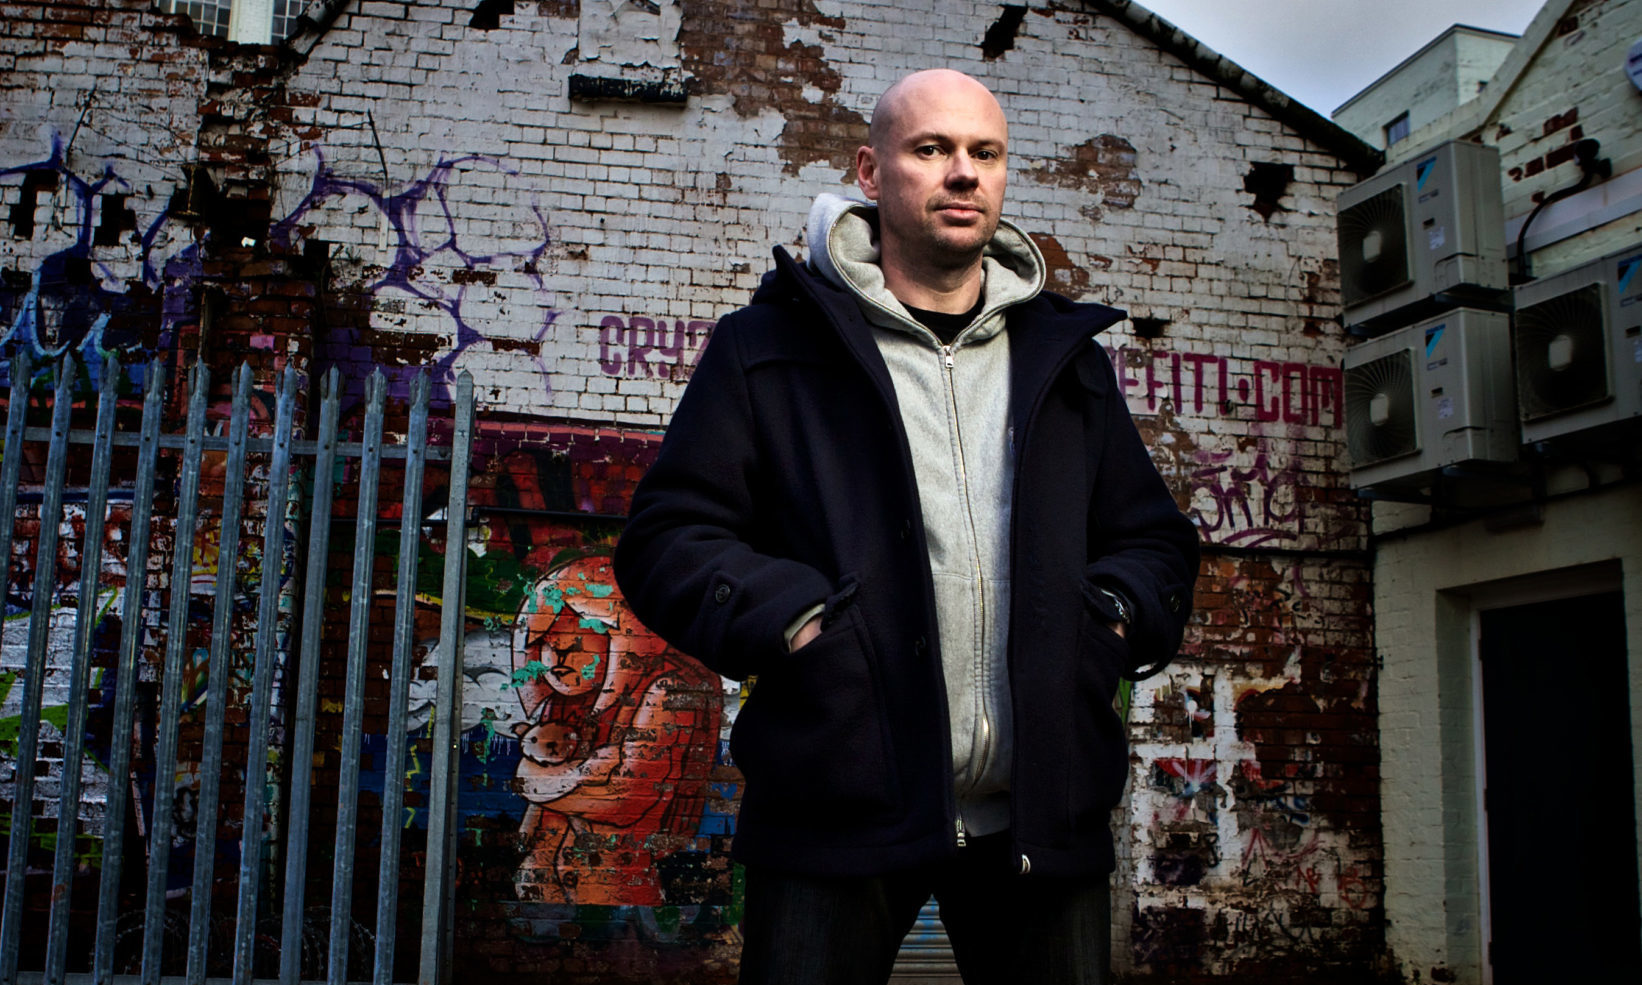 Legendary DJ Dave Seaman has worked with the likes of Kylie and the Pet Shop Boys.